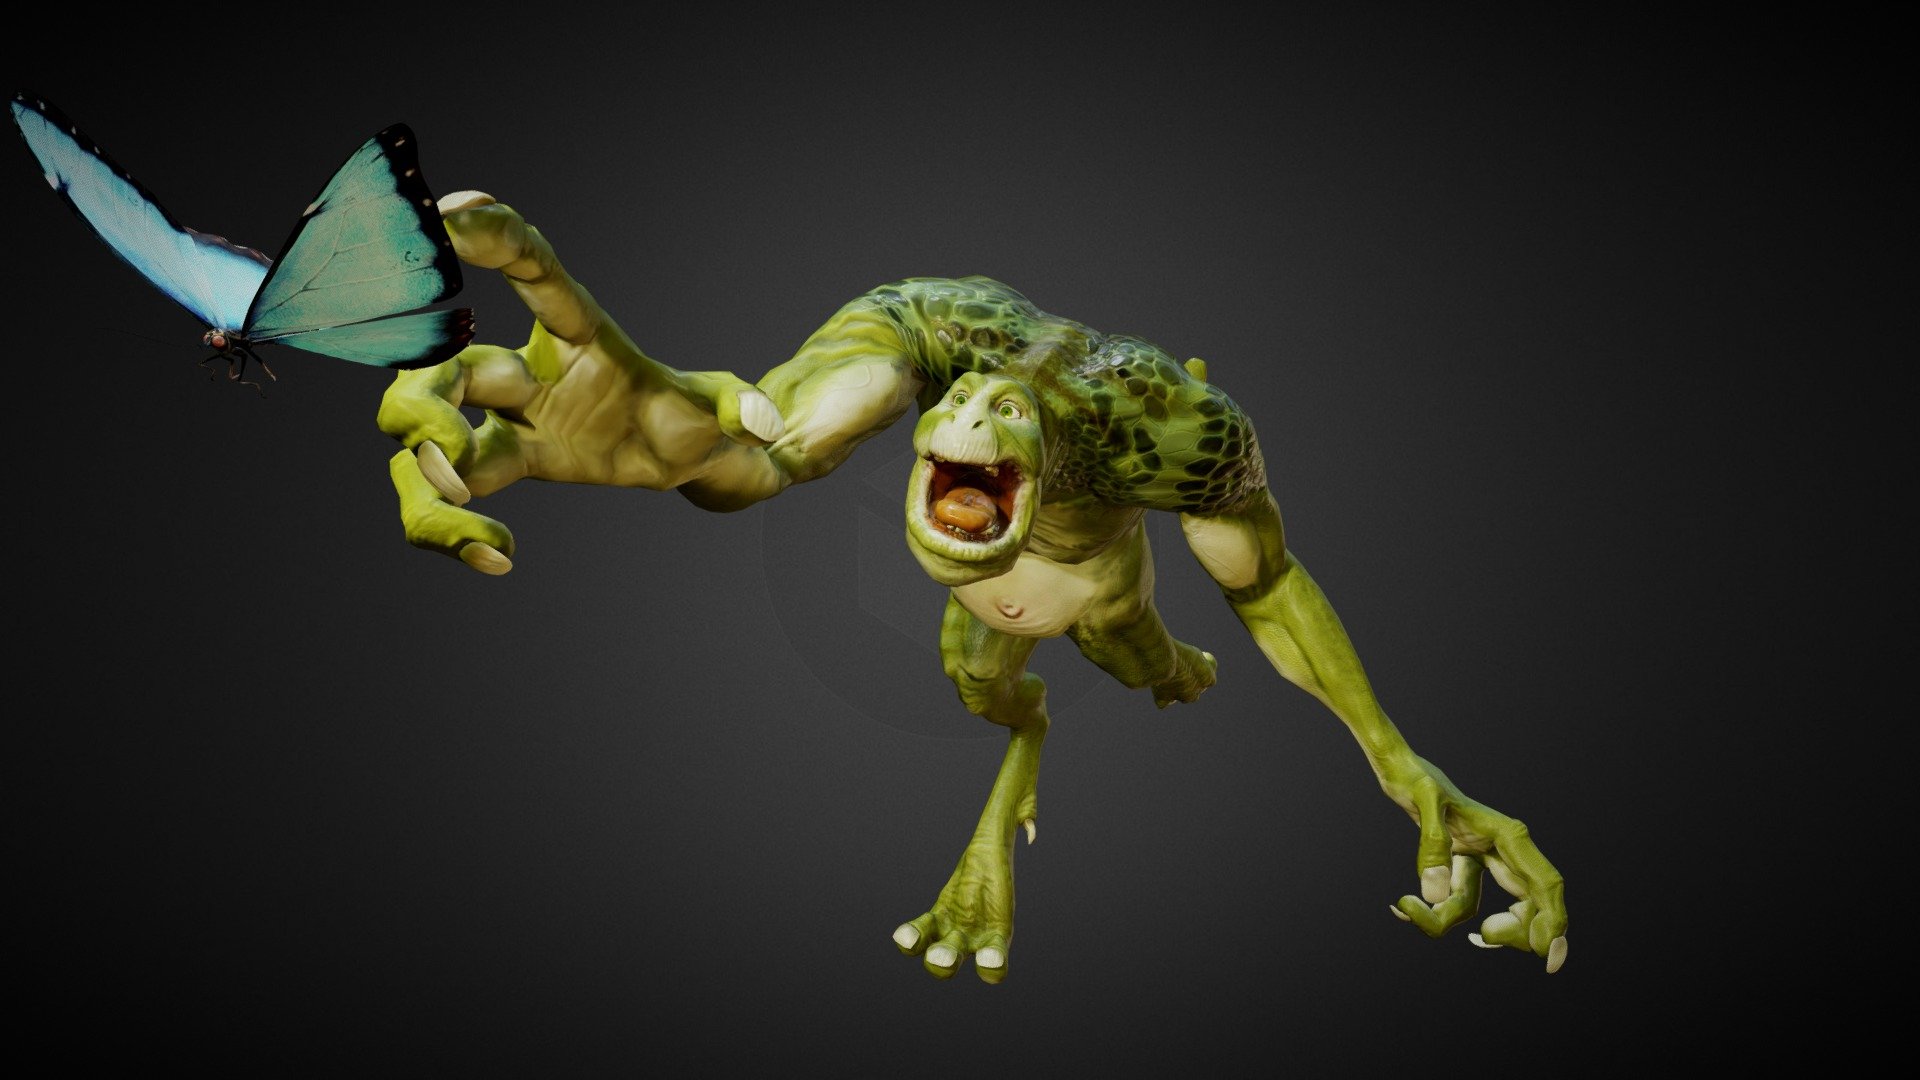 An old model I wanted to push to sketchfab - The Creature - 3D model by pieriko 3d model